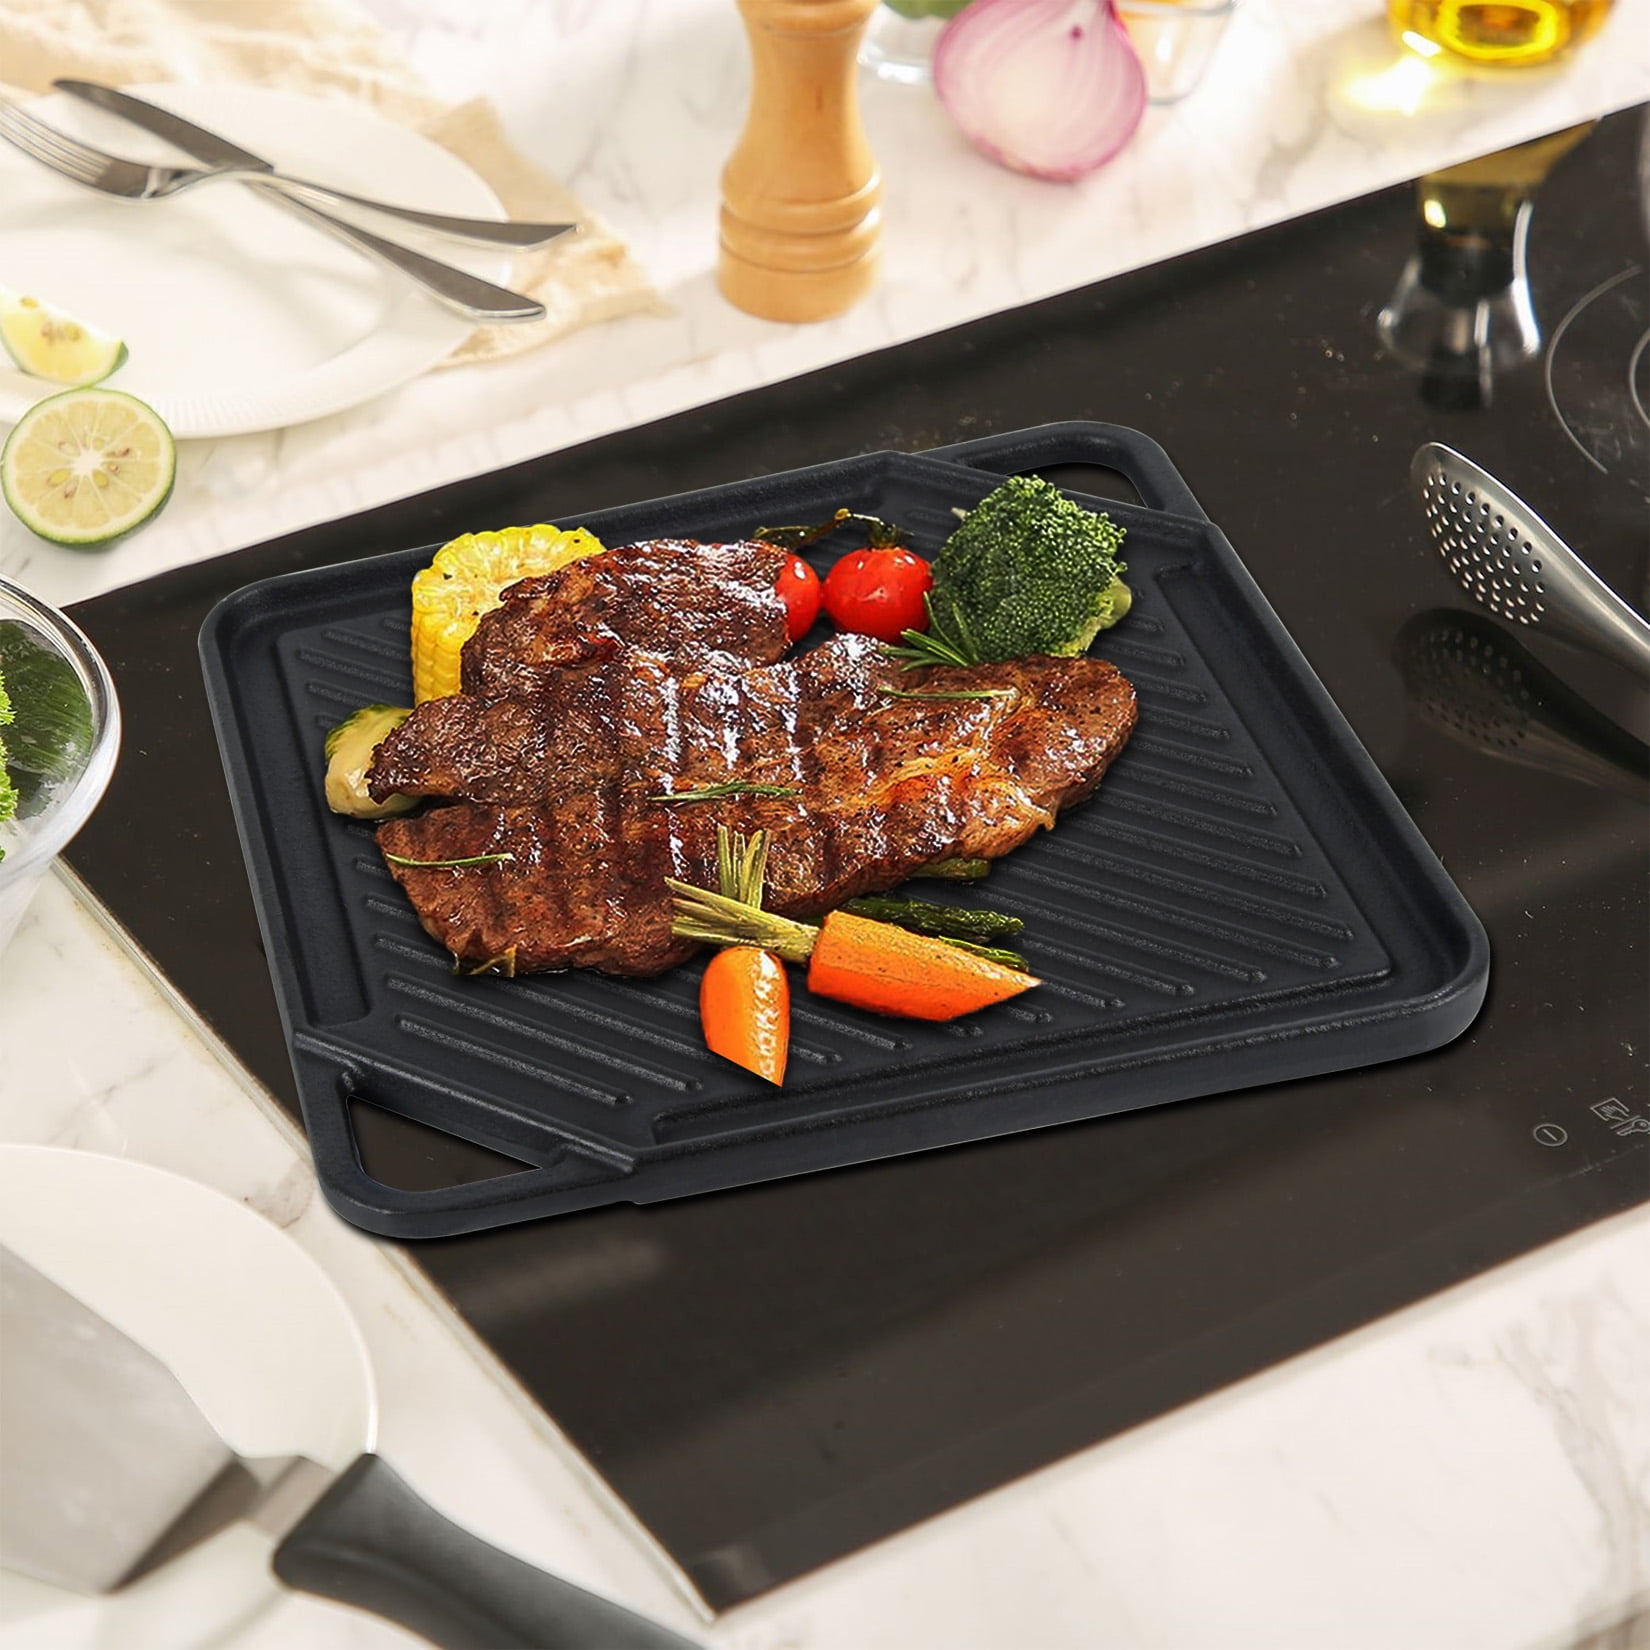 ProSource 2-in-1 Reversible 19.5” x 9” Cast Iron Griddle with Handles,  Preseasoned & Non-Stick for Gas Stovetop, Oven, and Open Fire.